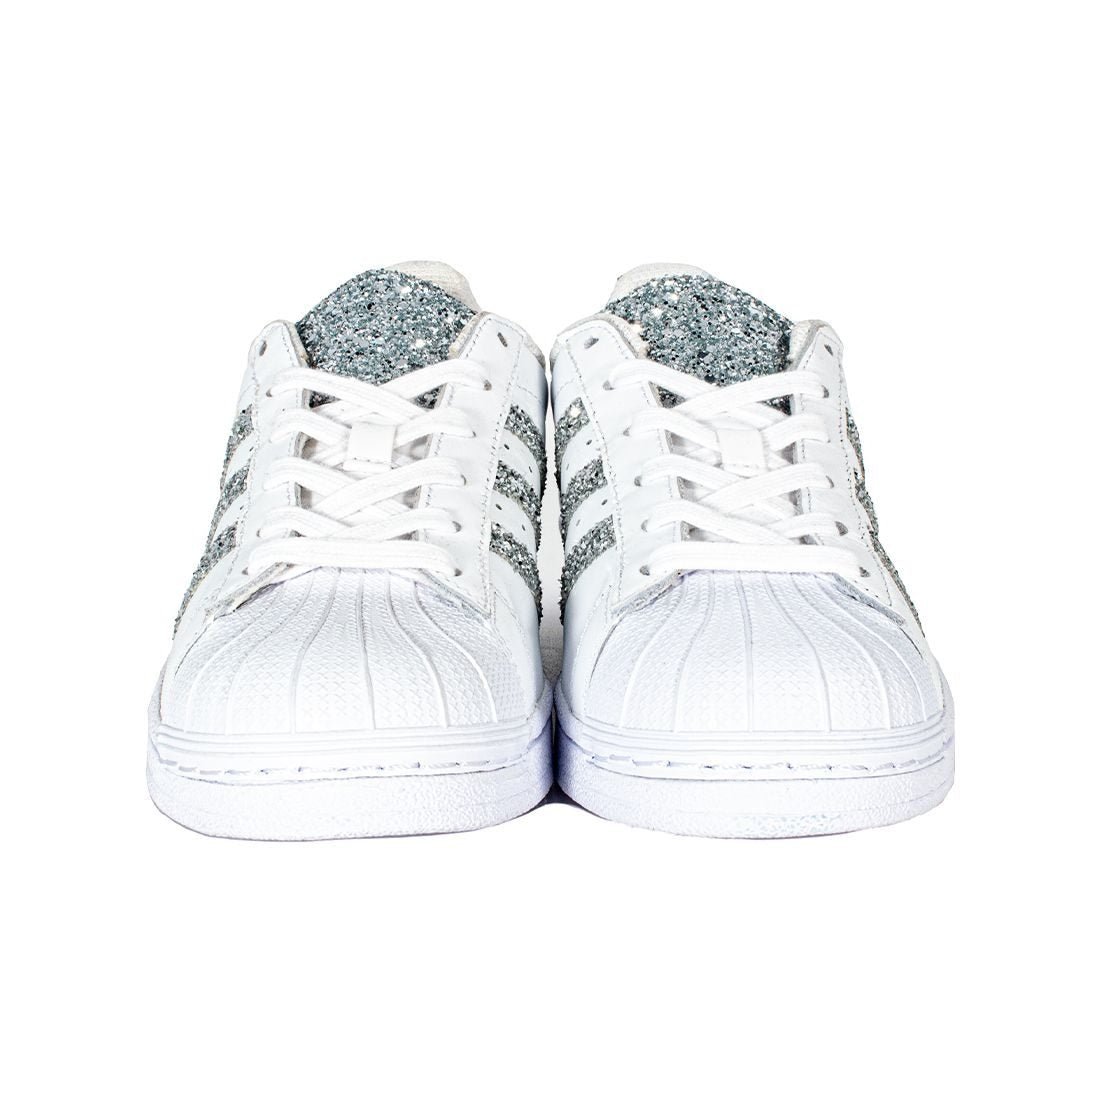 ADIDAS SUPERSTAR PERSONALIZZATE FERENC